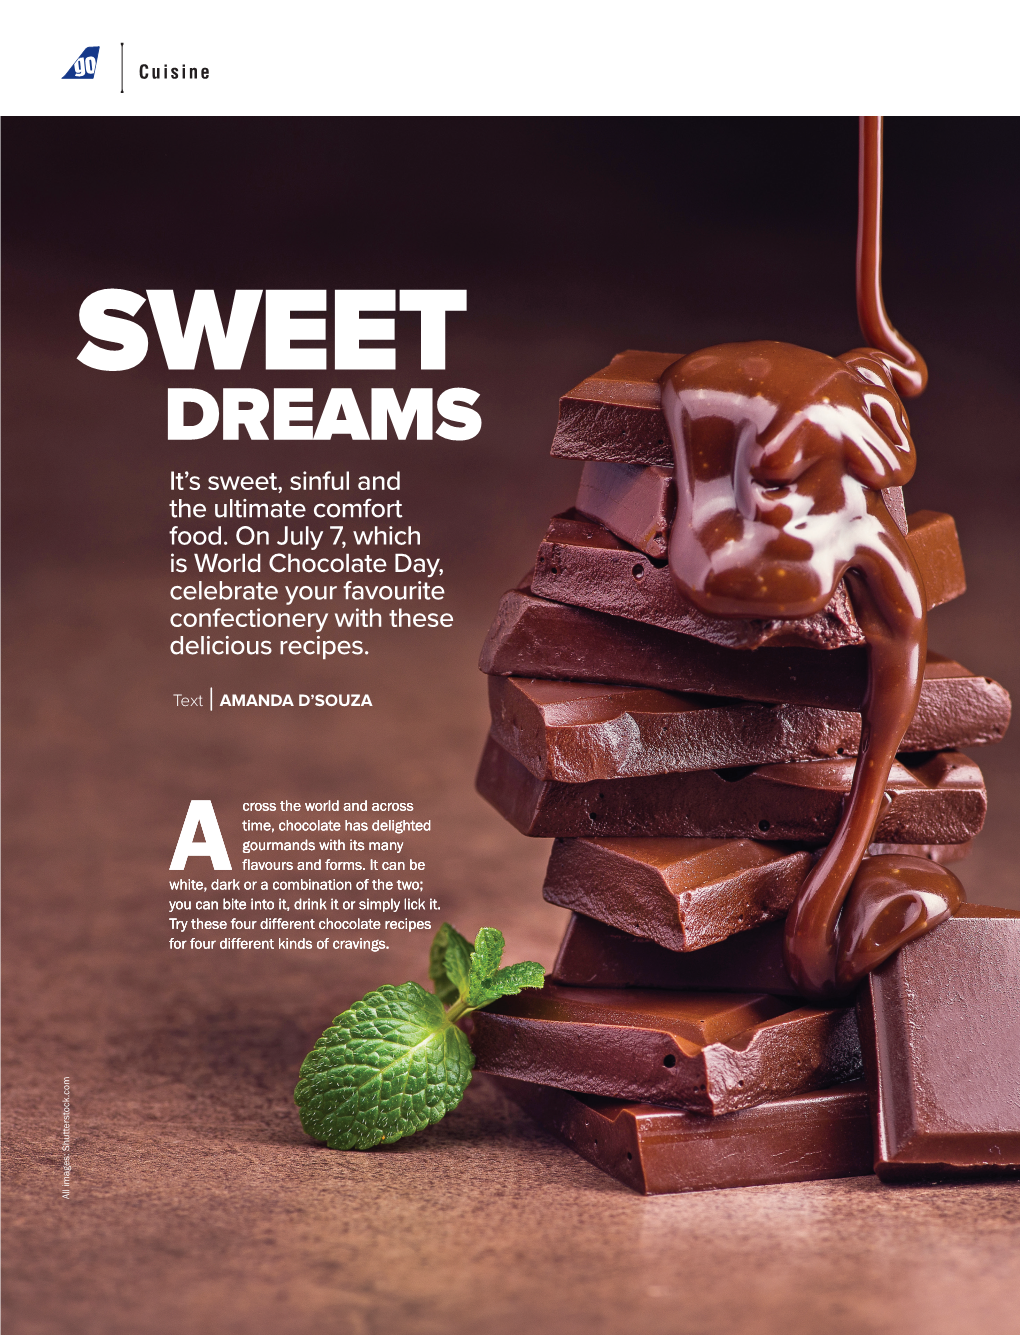 DREAMS It’S Sweet, Sinful and the Ultimate Comfort Food